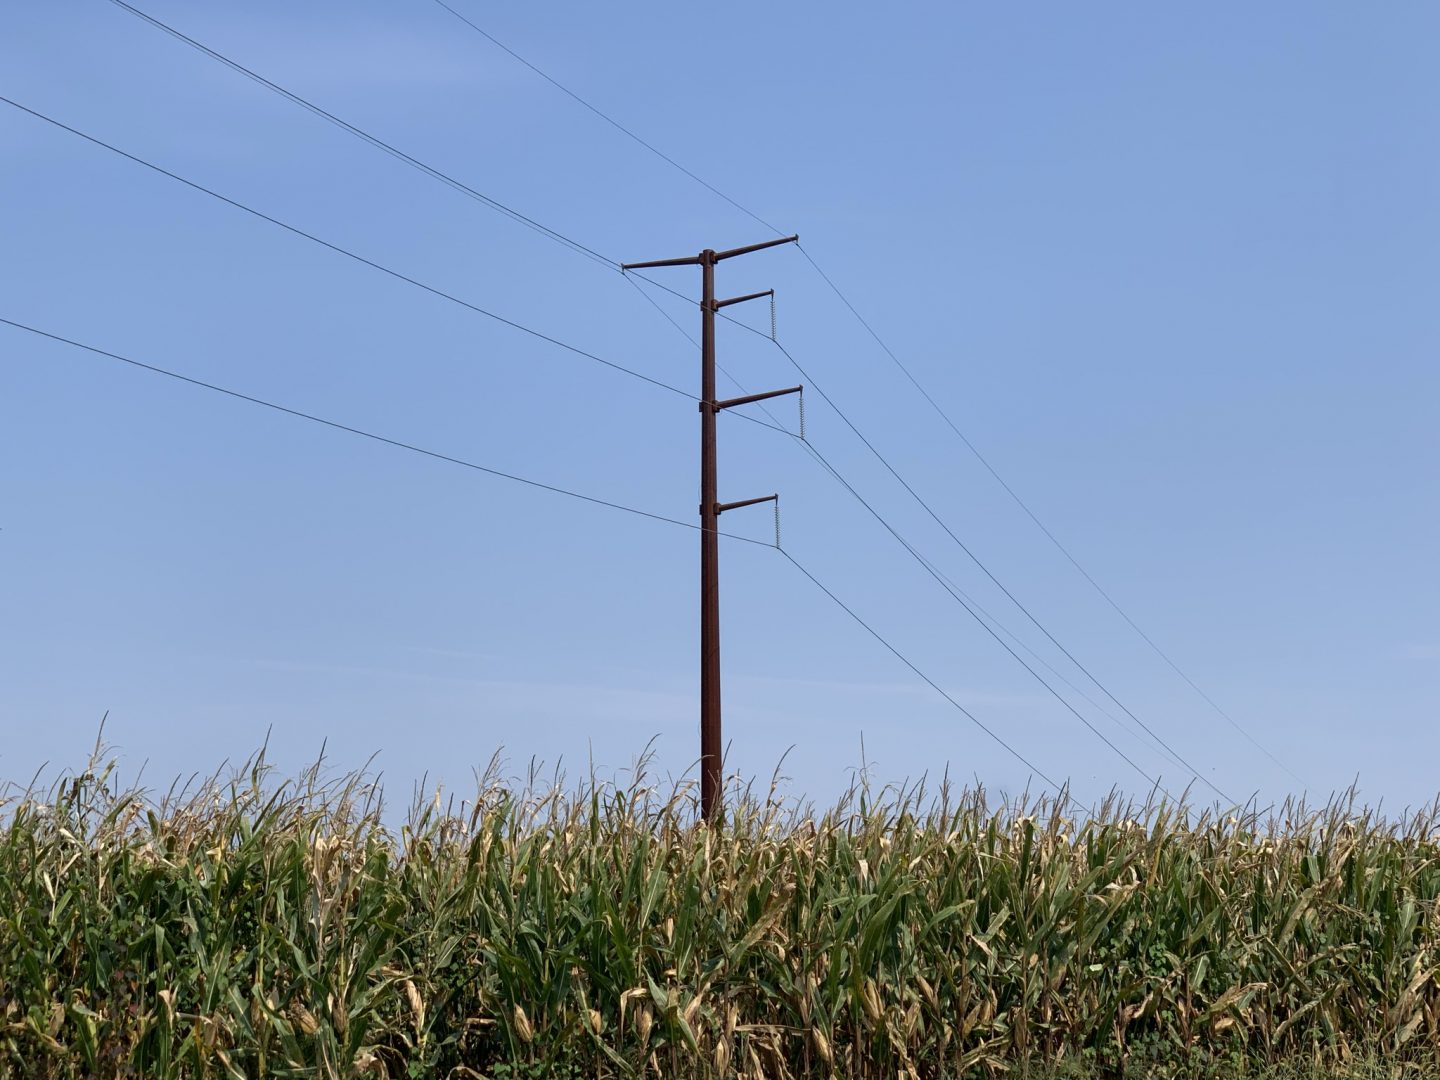 A transmission line stands in a cornfield in Chanceford Township, York County on Sept. 13, 2021.